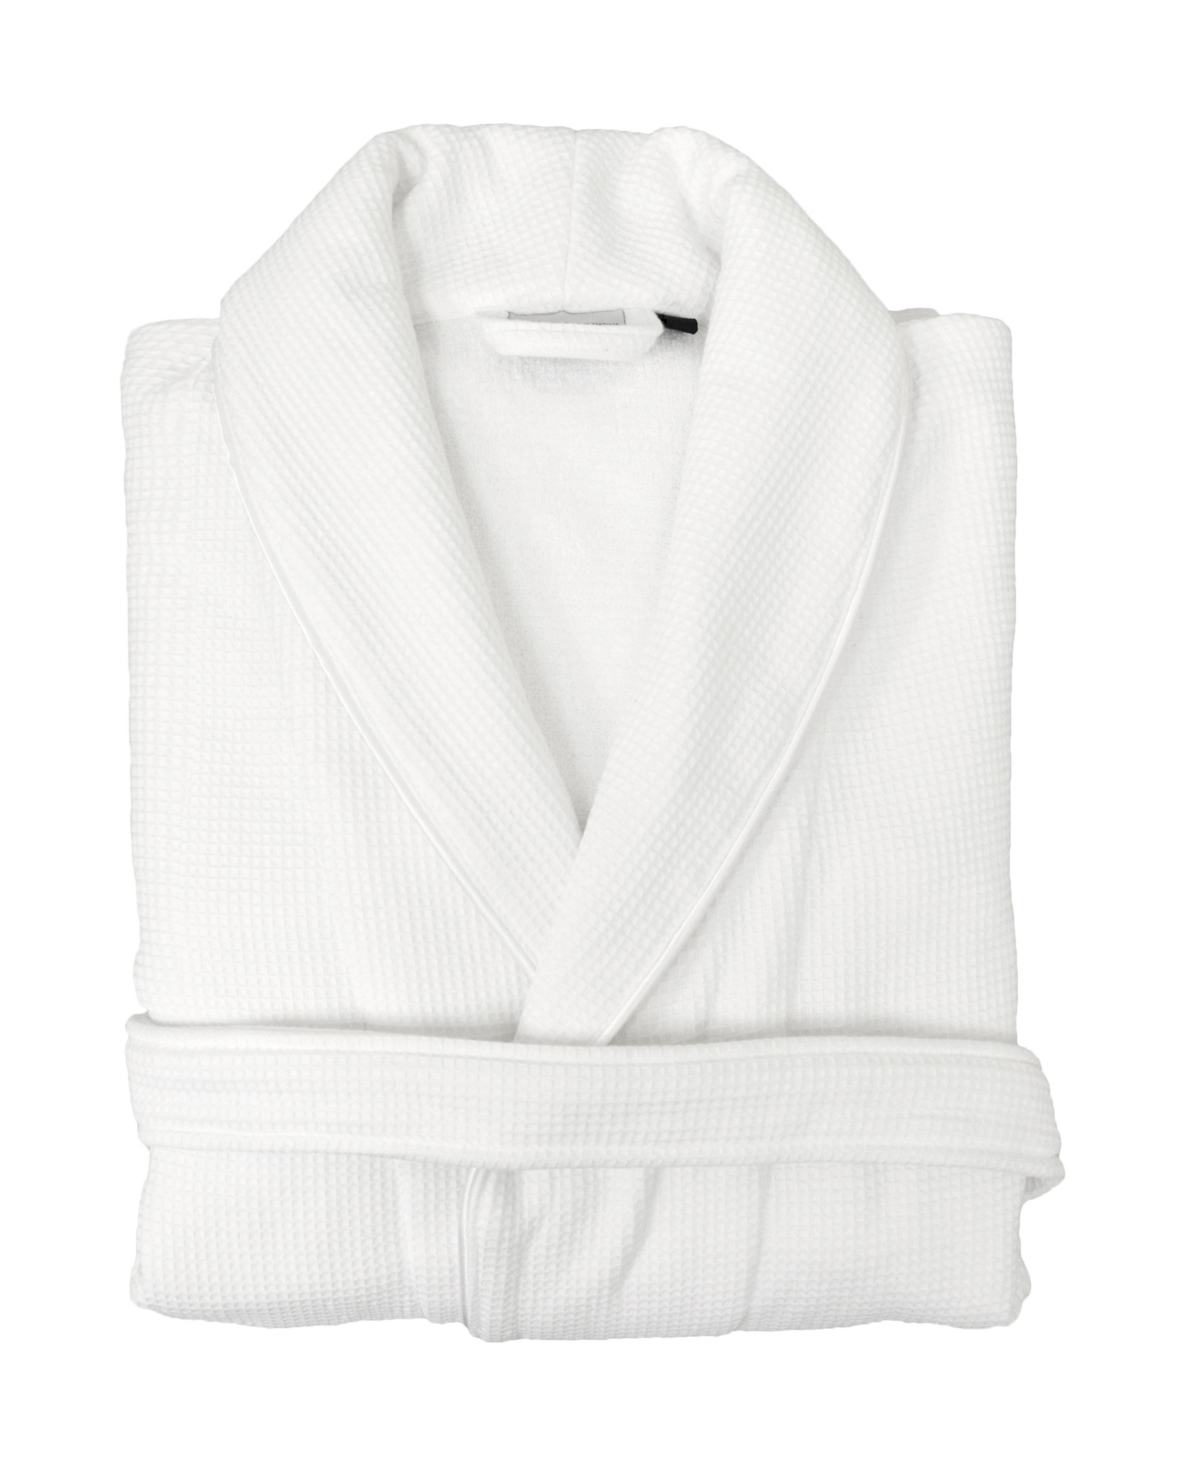 Waffle Terry Bath Robe with Satin Piped Trim - White/White